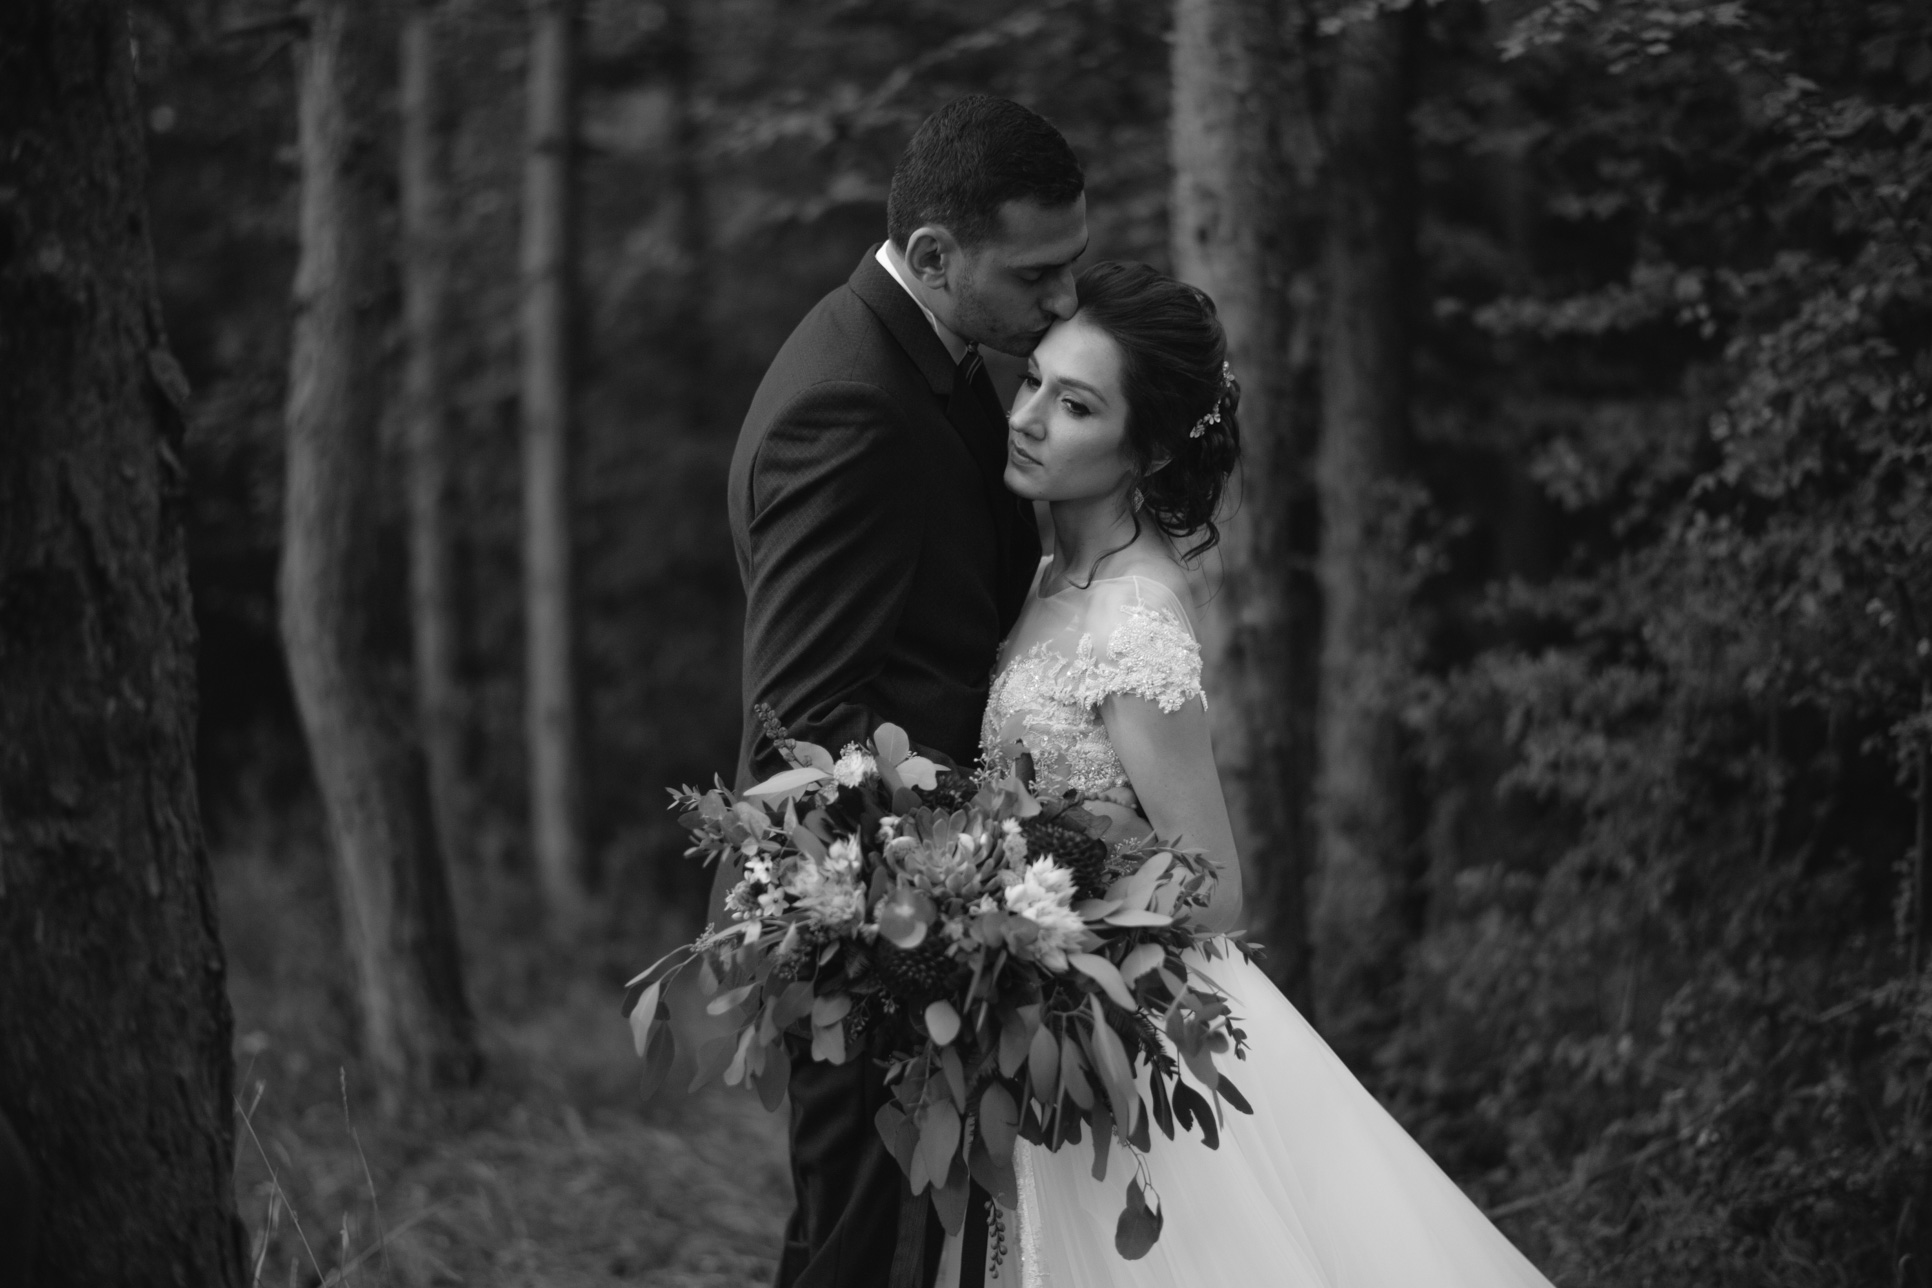 Intimate Portraits With Bride And Groom